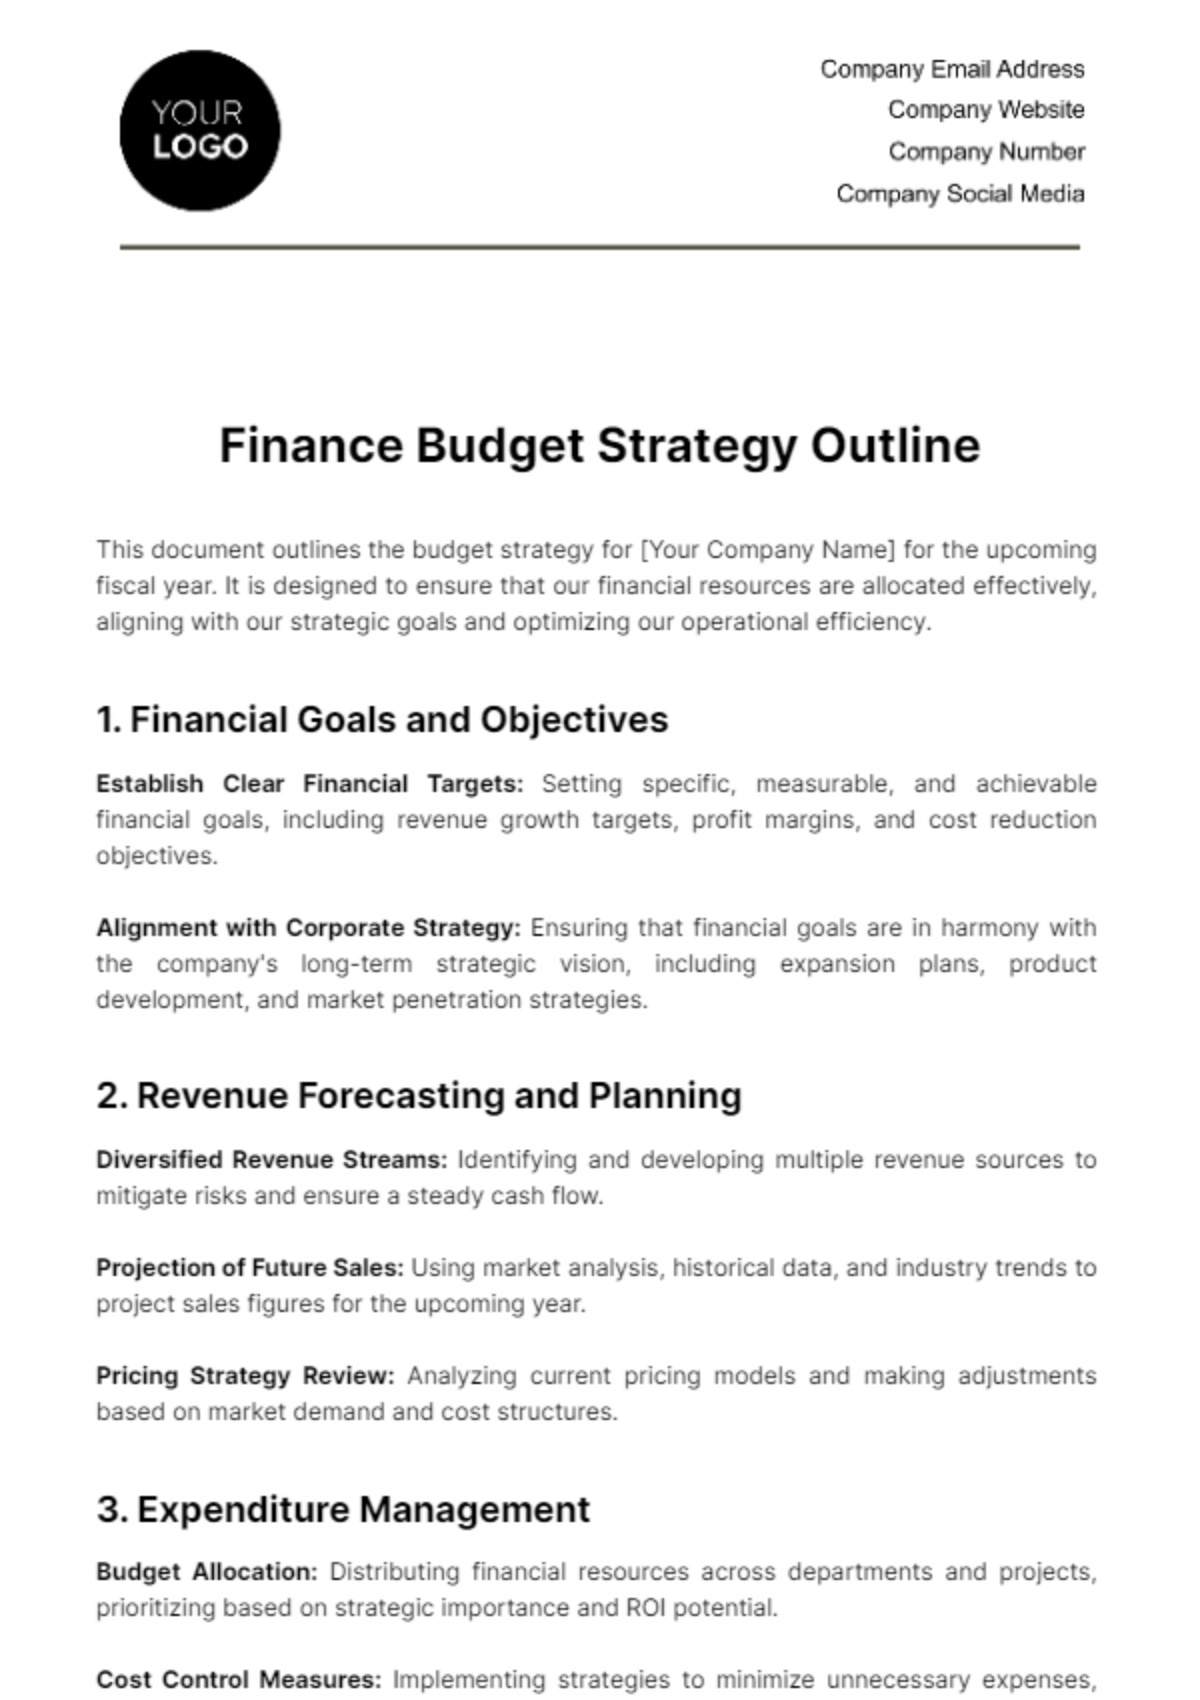 Finance Budget Strategy Outline Template